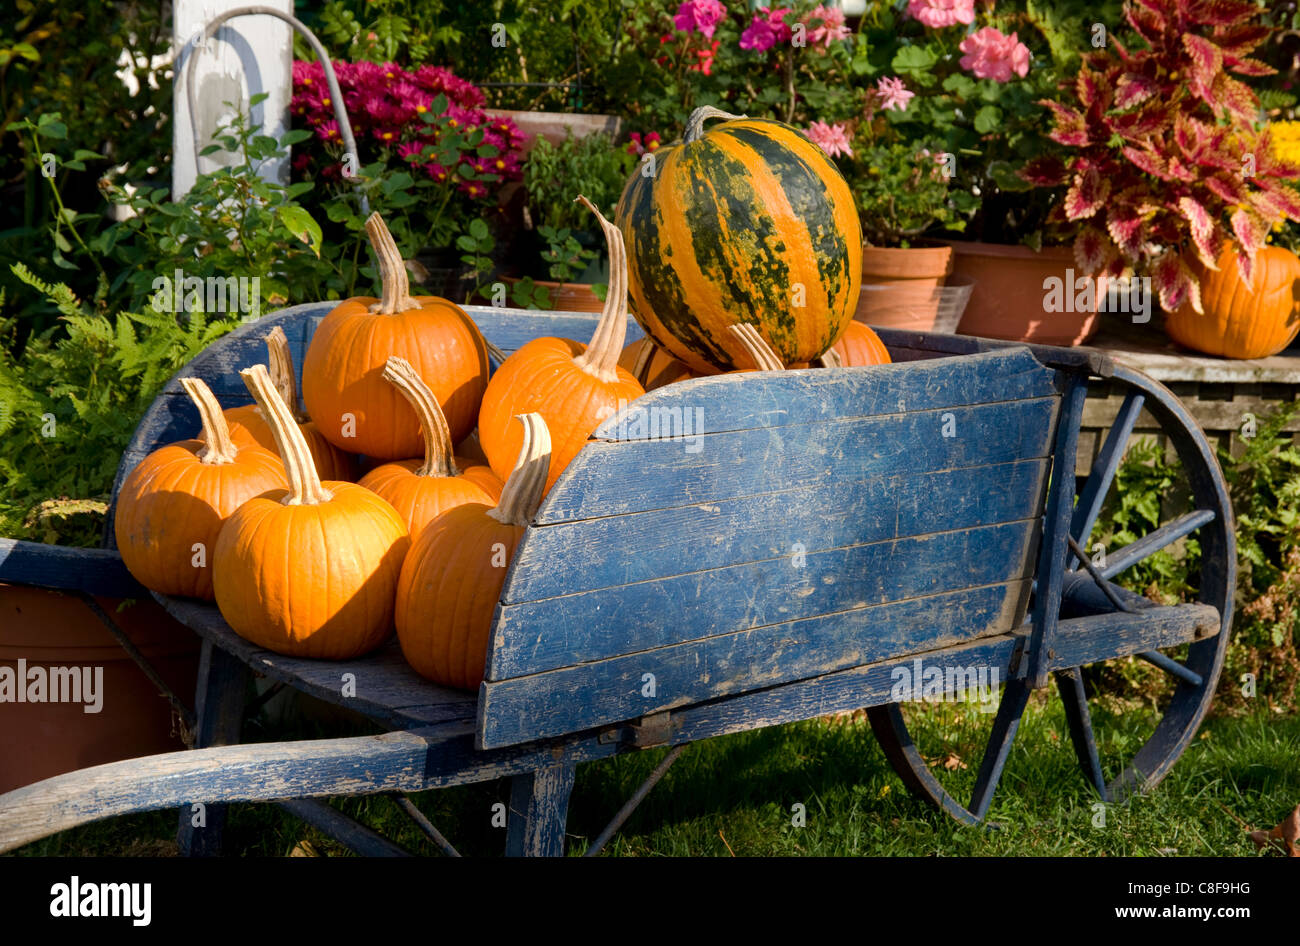 Pumpkins in a wooden wheel barrow in the historic village of Deerfield, Massachussetts, New England, United States of America Stock Photo